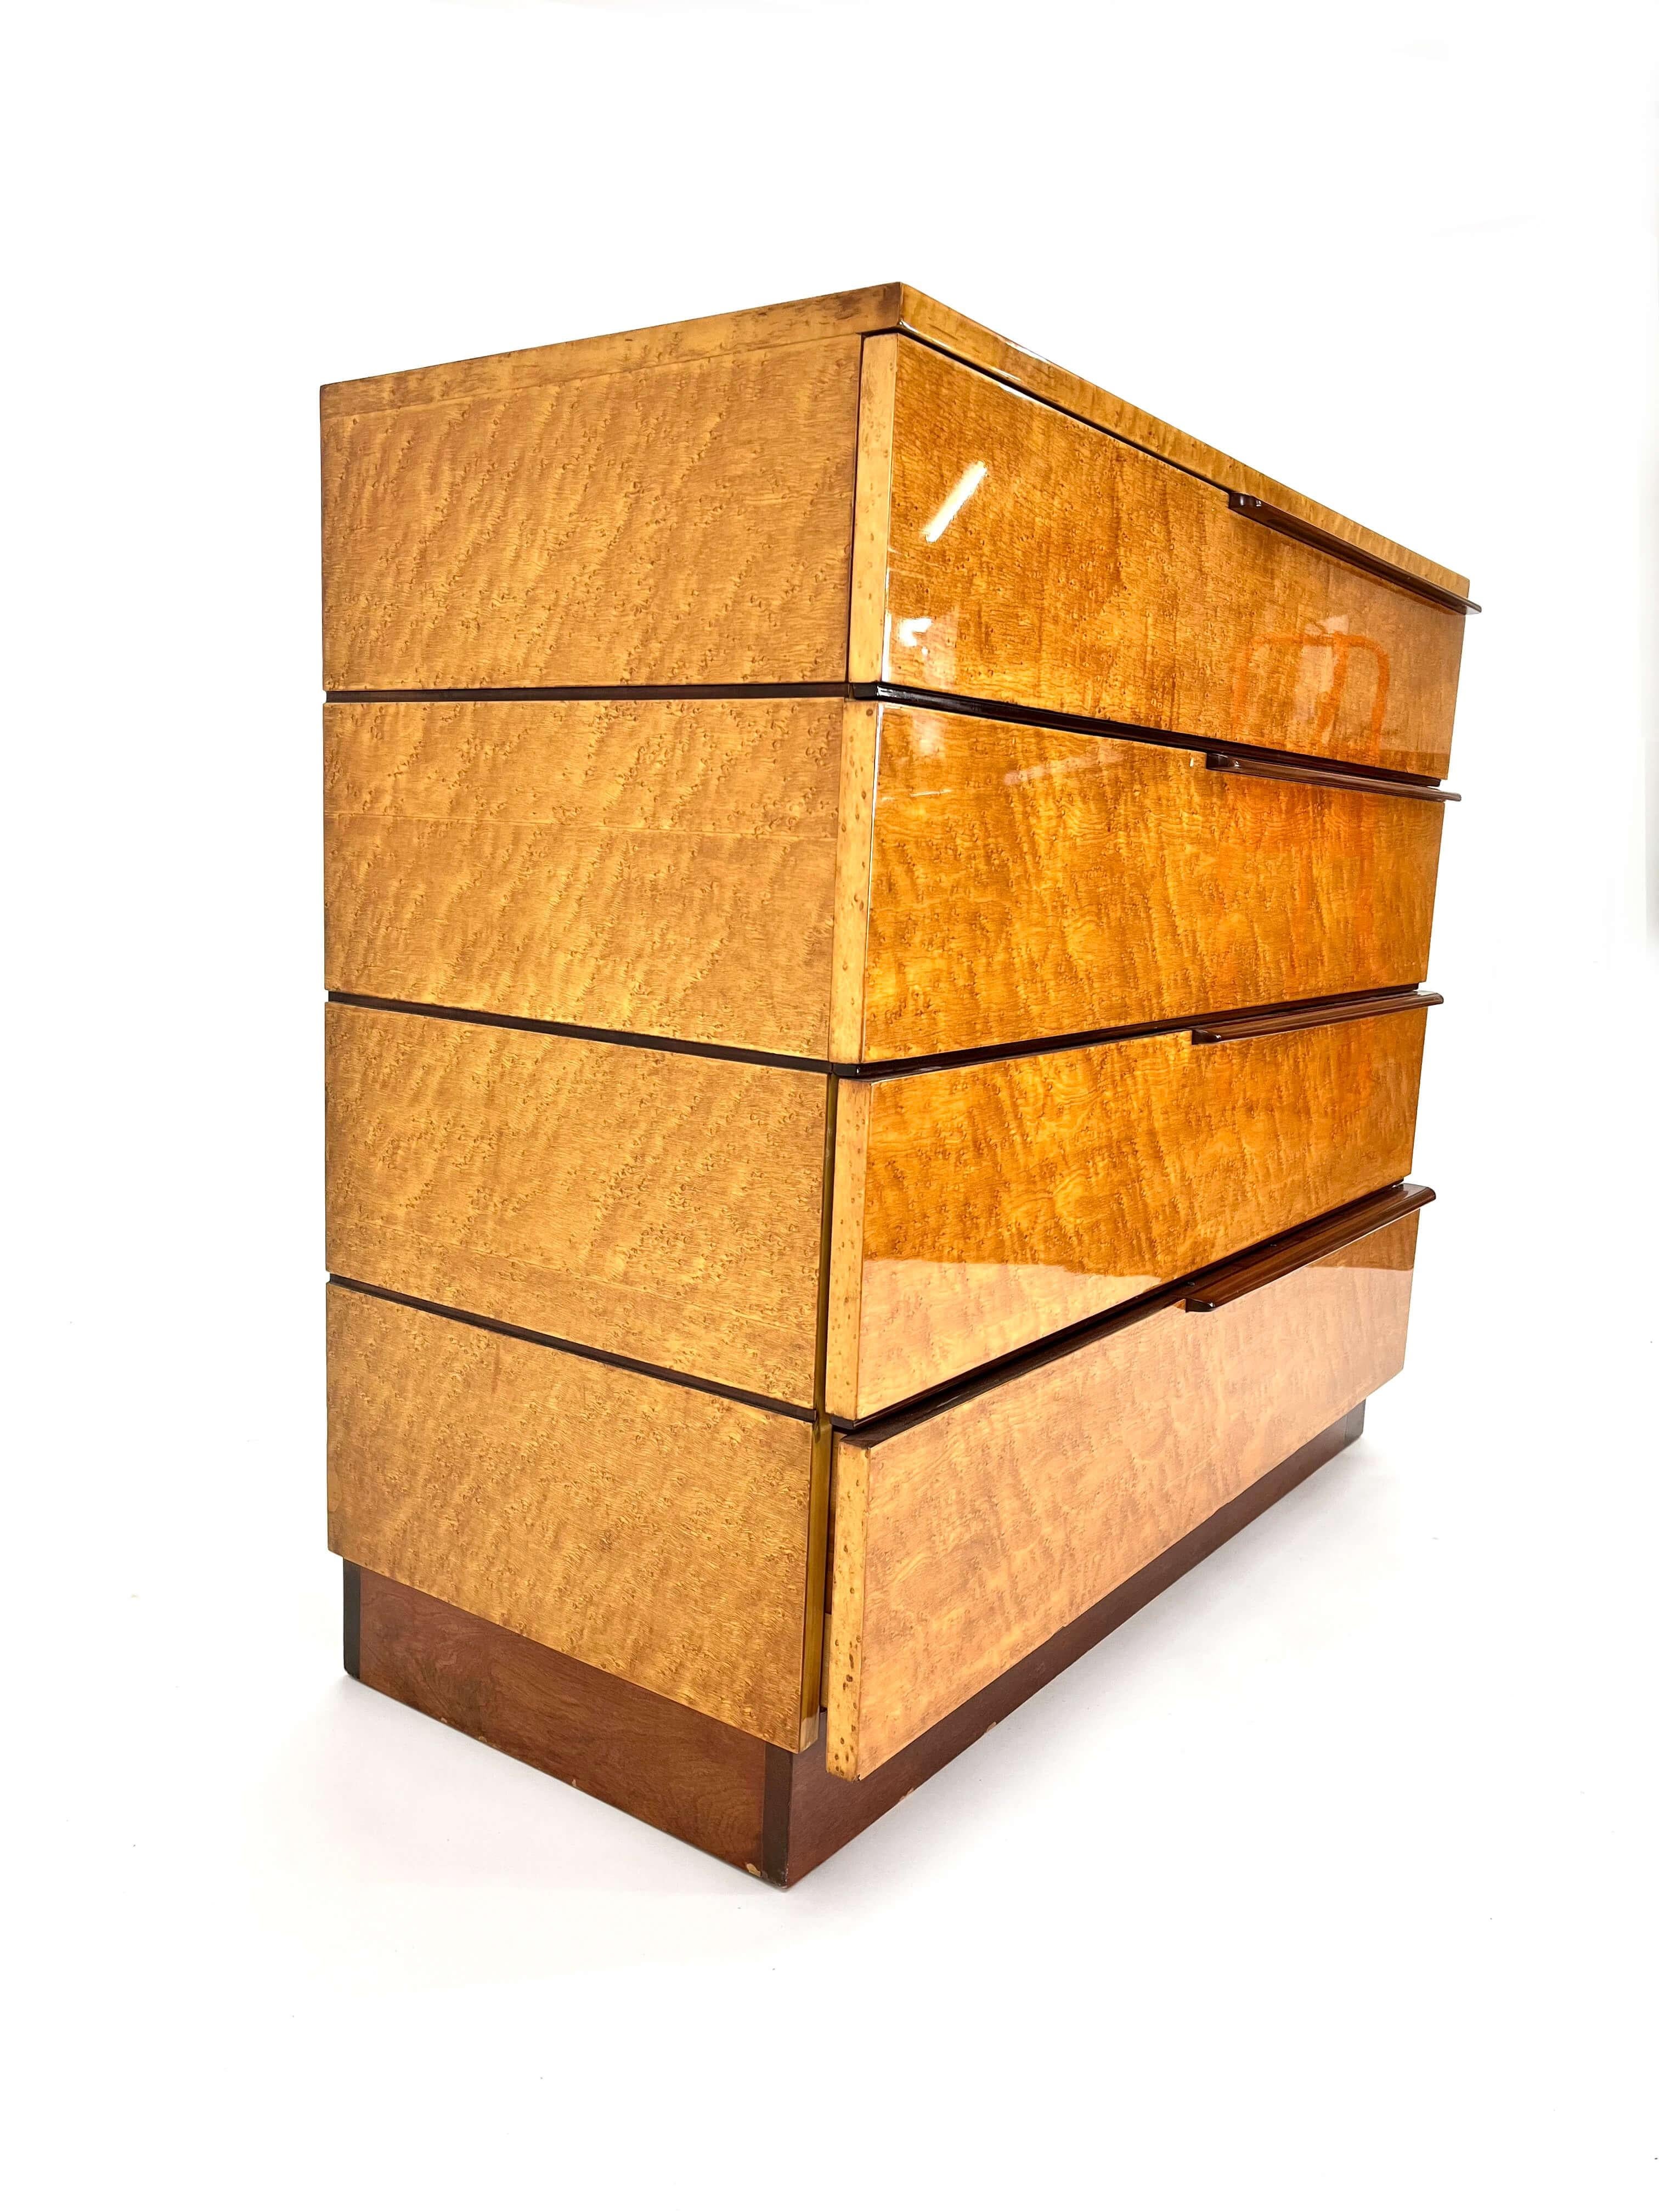 Art Deco Gilbert Rohde Chest of Drawers for Herman Miller in Birdseye Maple and Mahogany